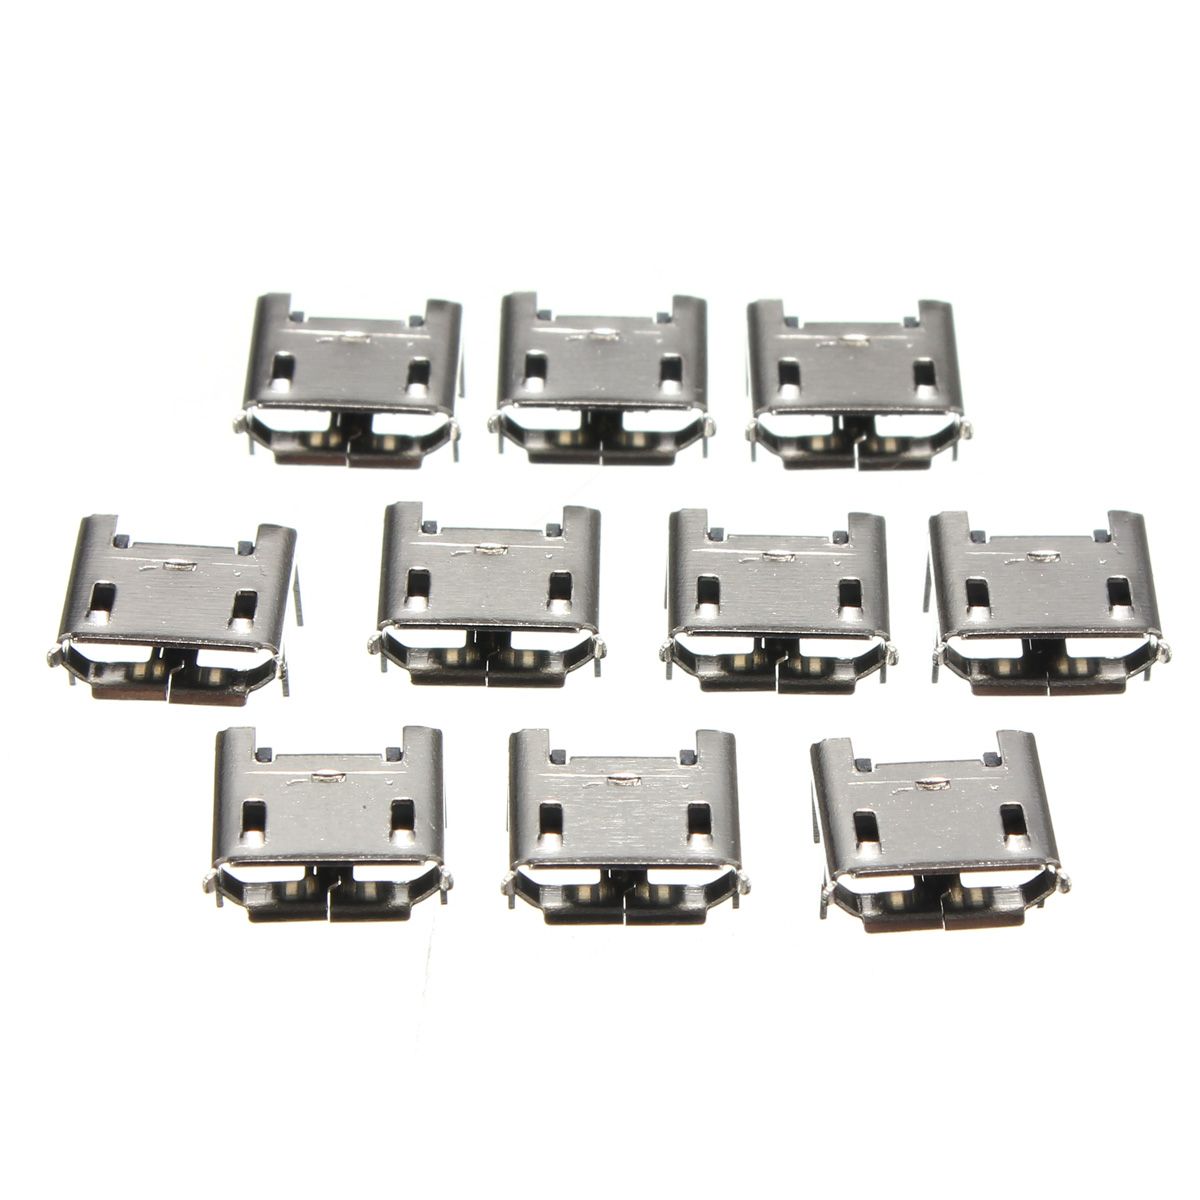 30pcs-Micro-USB-Type-B-5-Pin-Female-Socket-4-Vertical-Legs-For-Solder-Connector-1370518